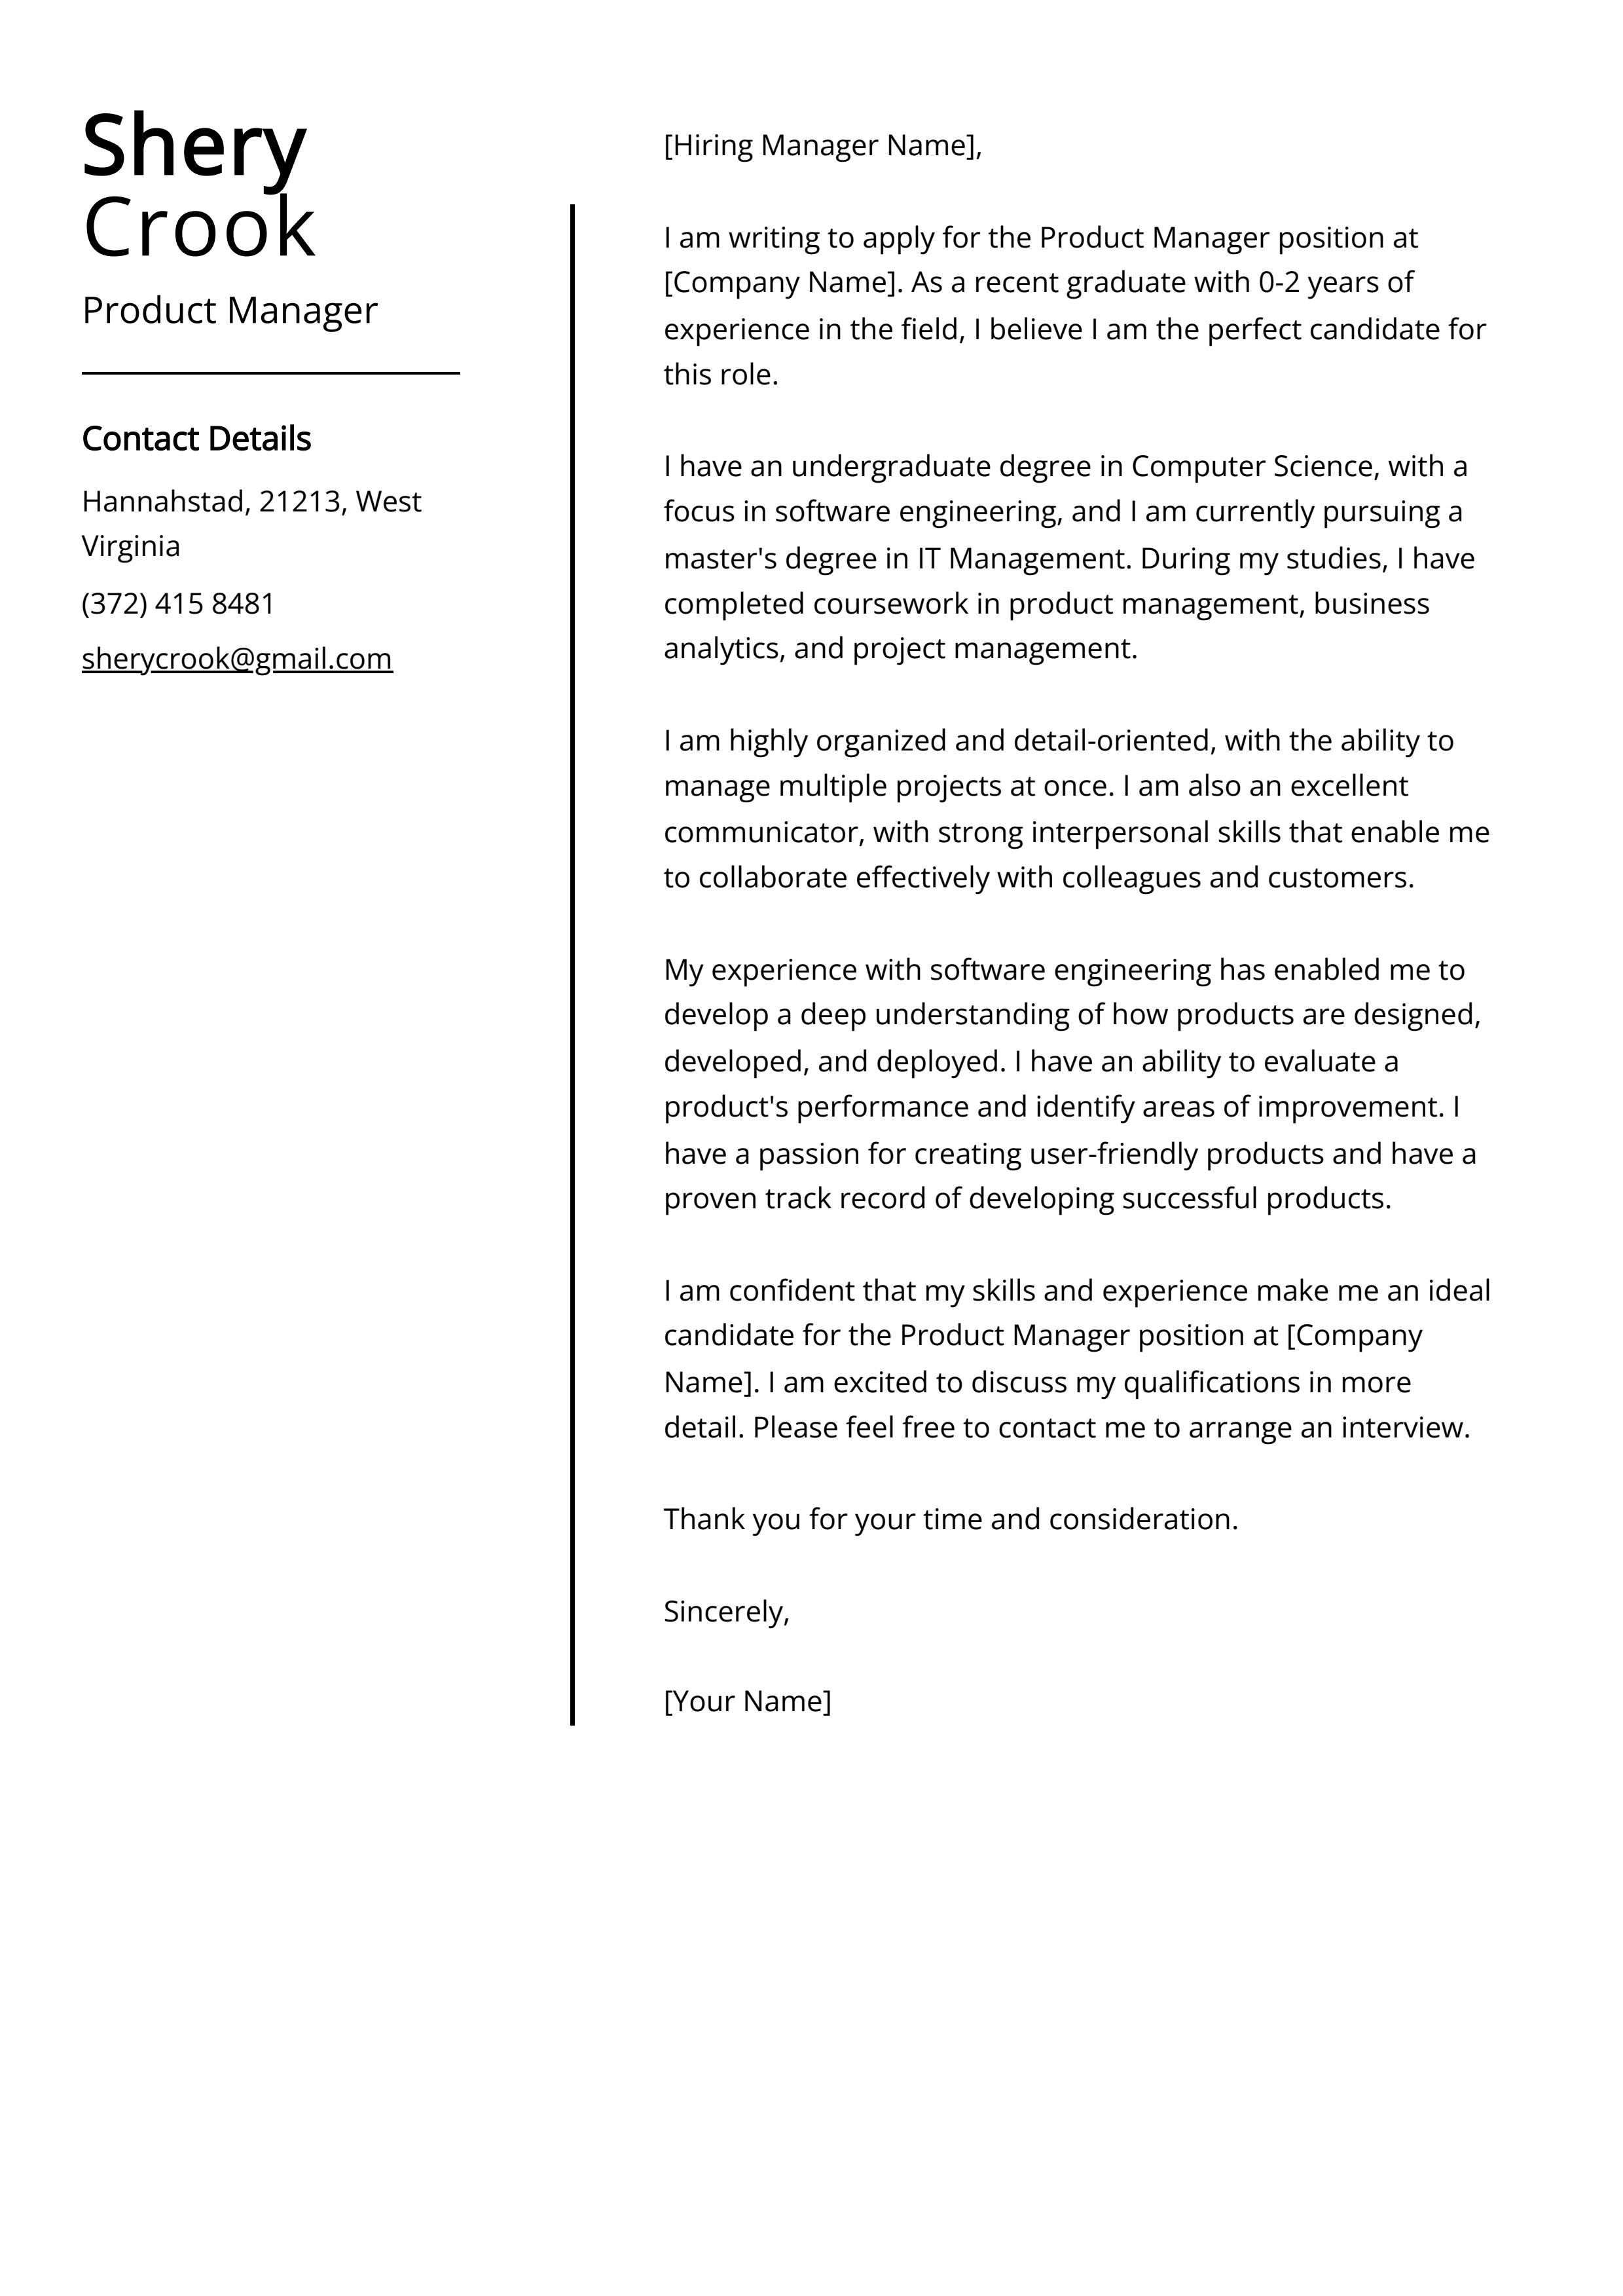 Experienced Product Manager Cover Letter Example